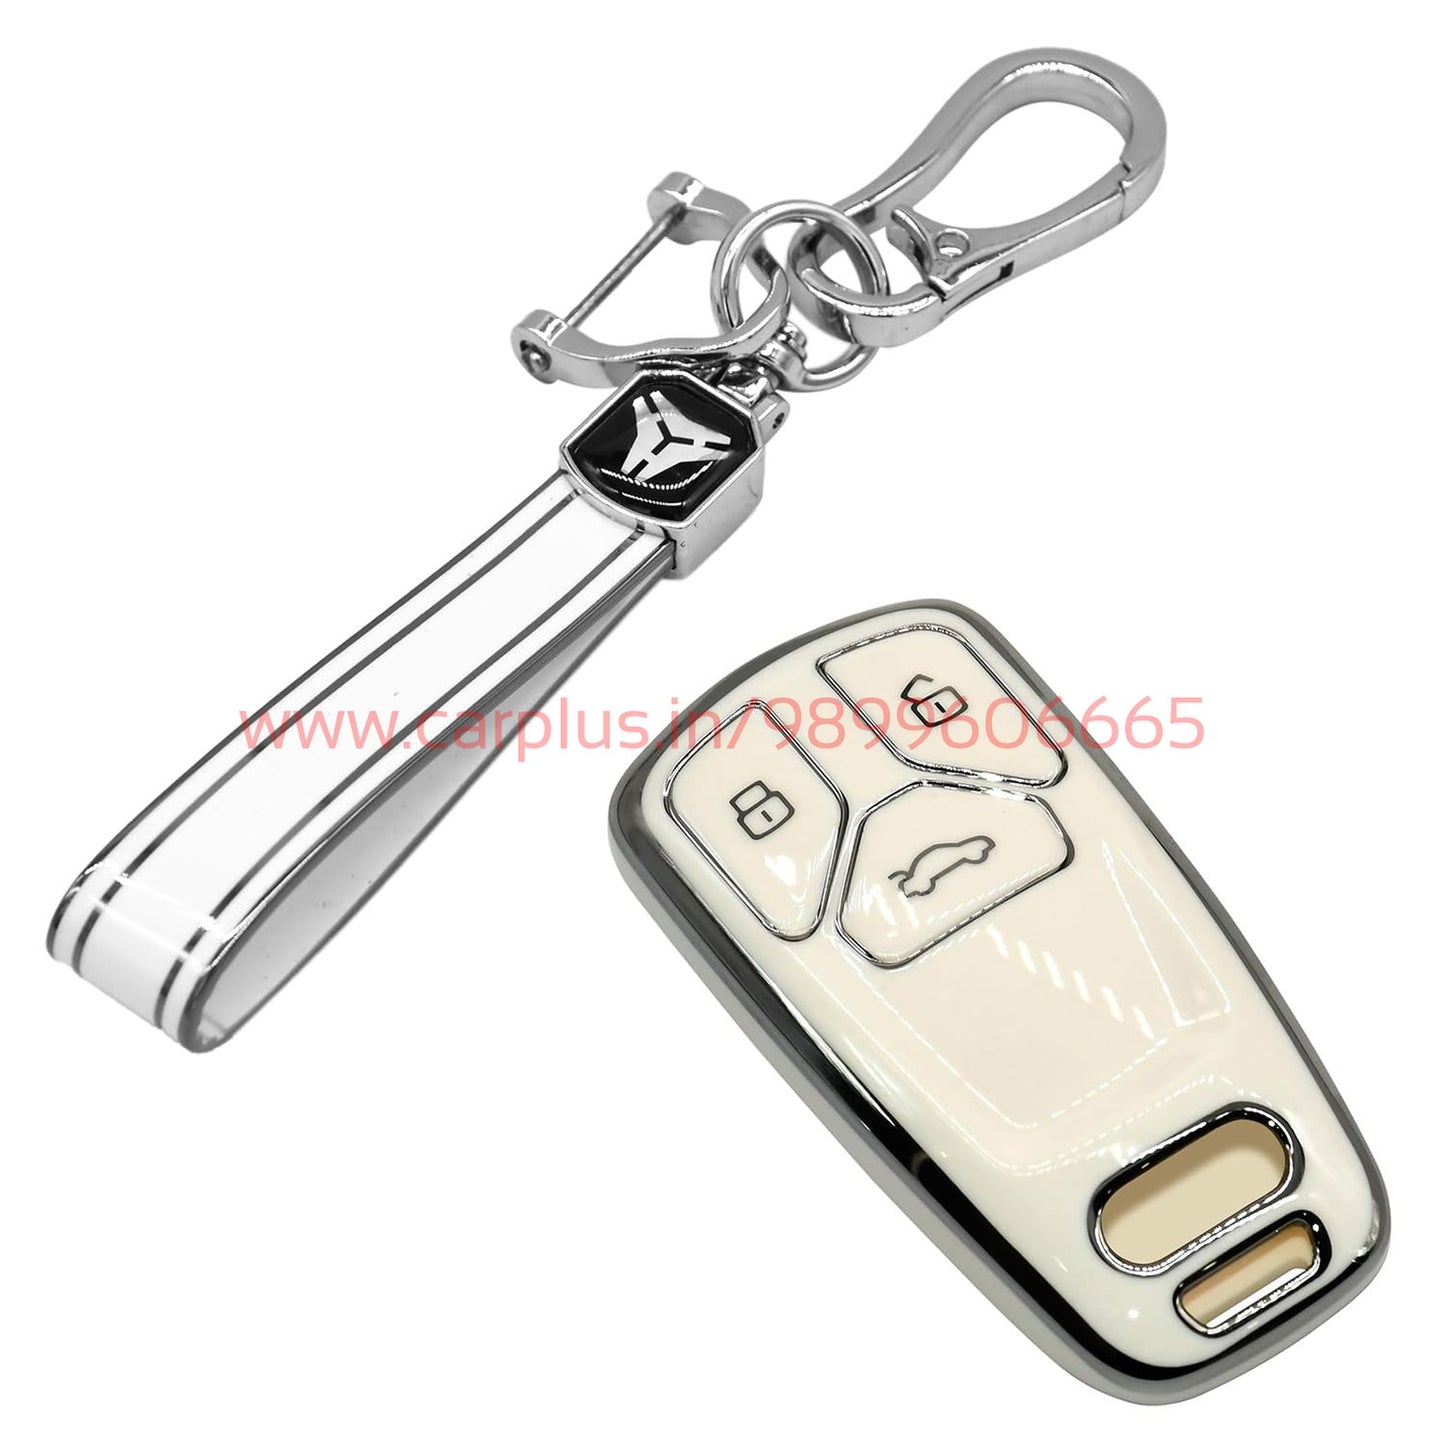 
                  
                    KMH TPU Silver Car Key Cover Compatible with Audi A4 TT TTS Q7 2016 2017 Key Cover-TPU SILVER KEY COVER-KMH-KEY COVER-White with Keychain-CARPLUS
                  
                